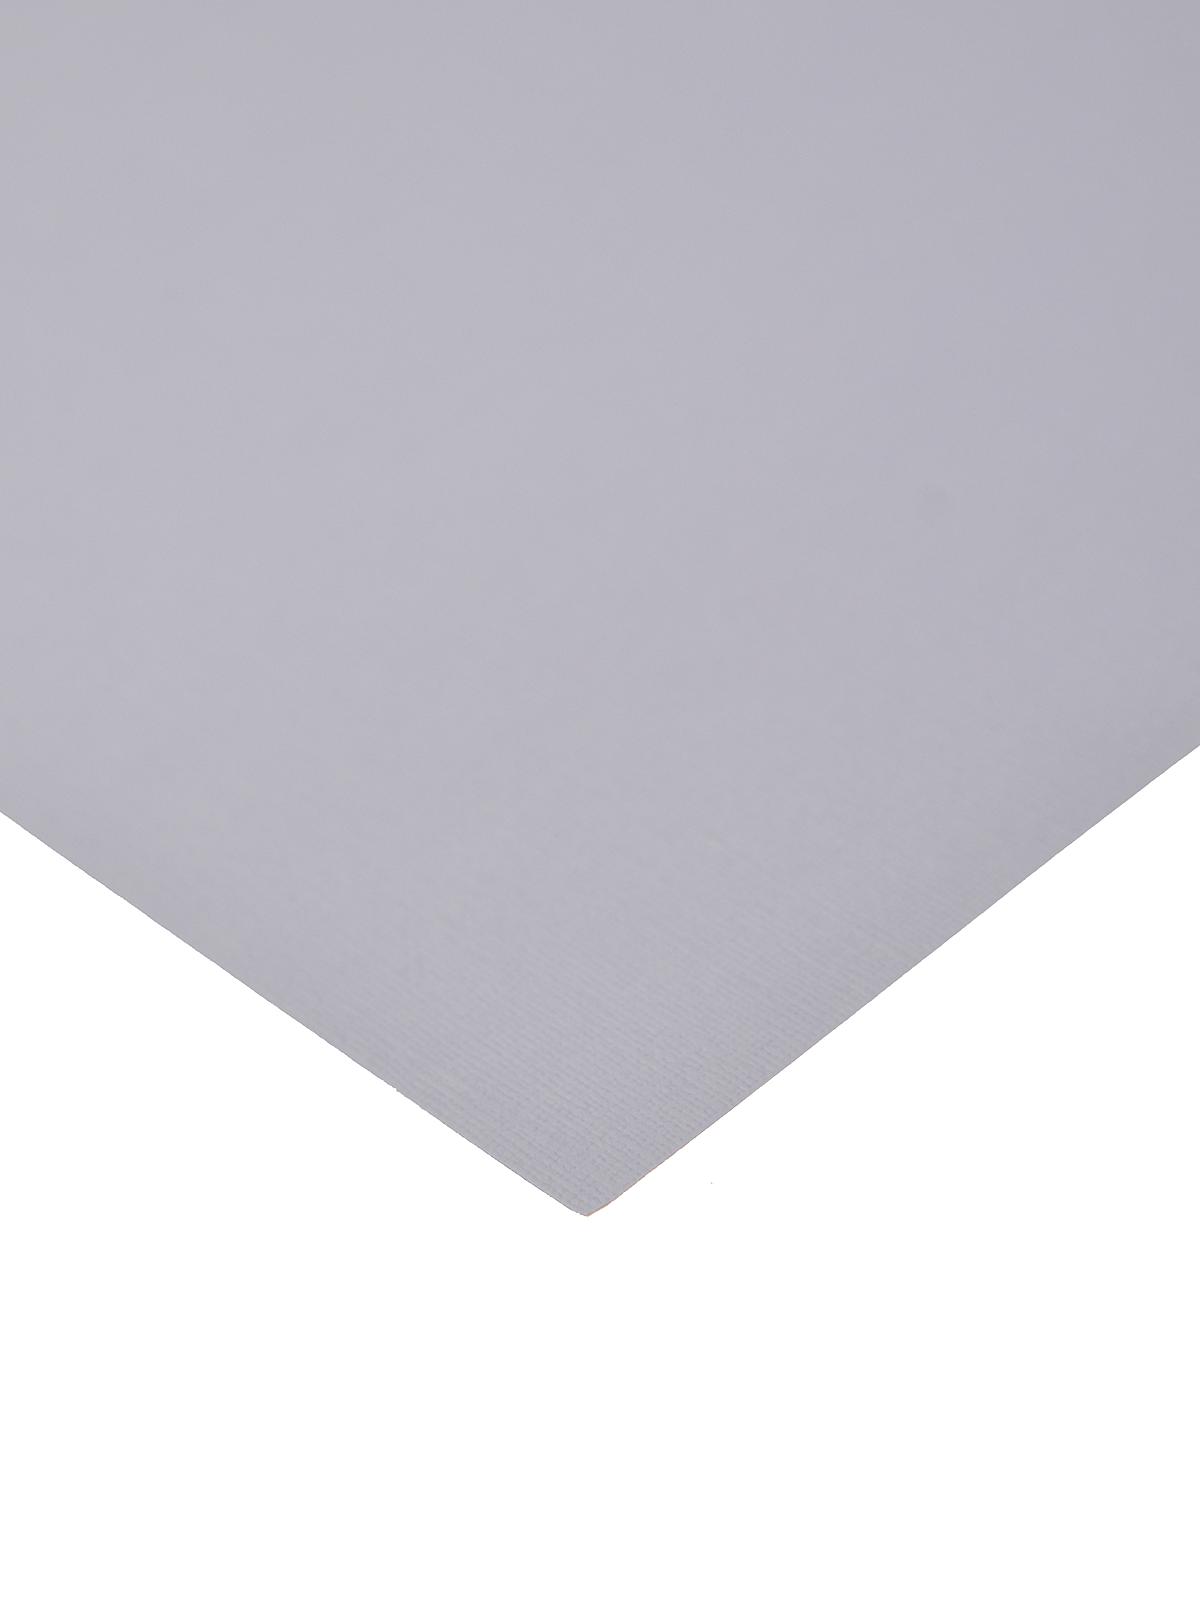 80 Lb. Canvas 8.5 In. X 11 In. Sheet Lilac Mist